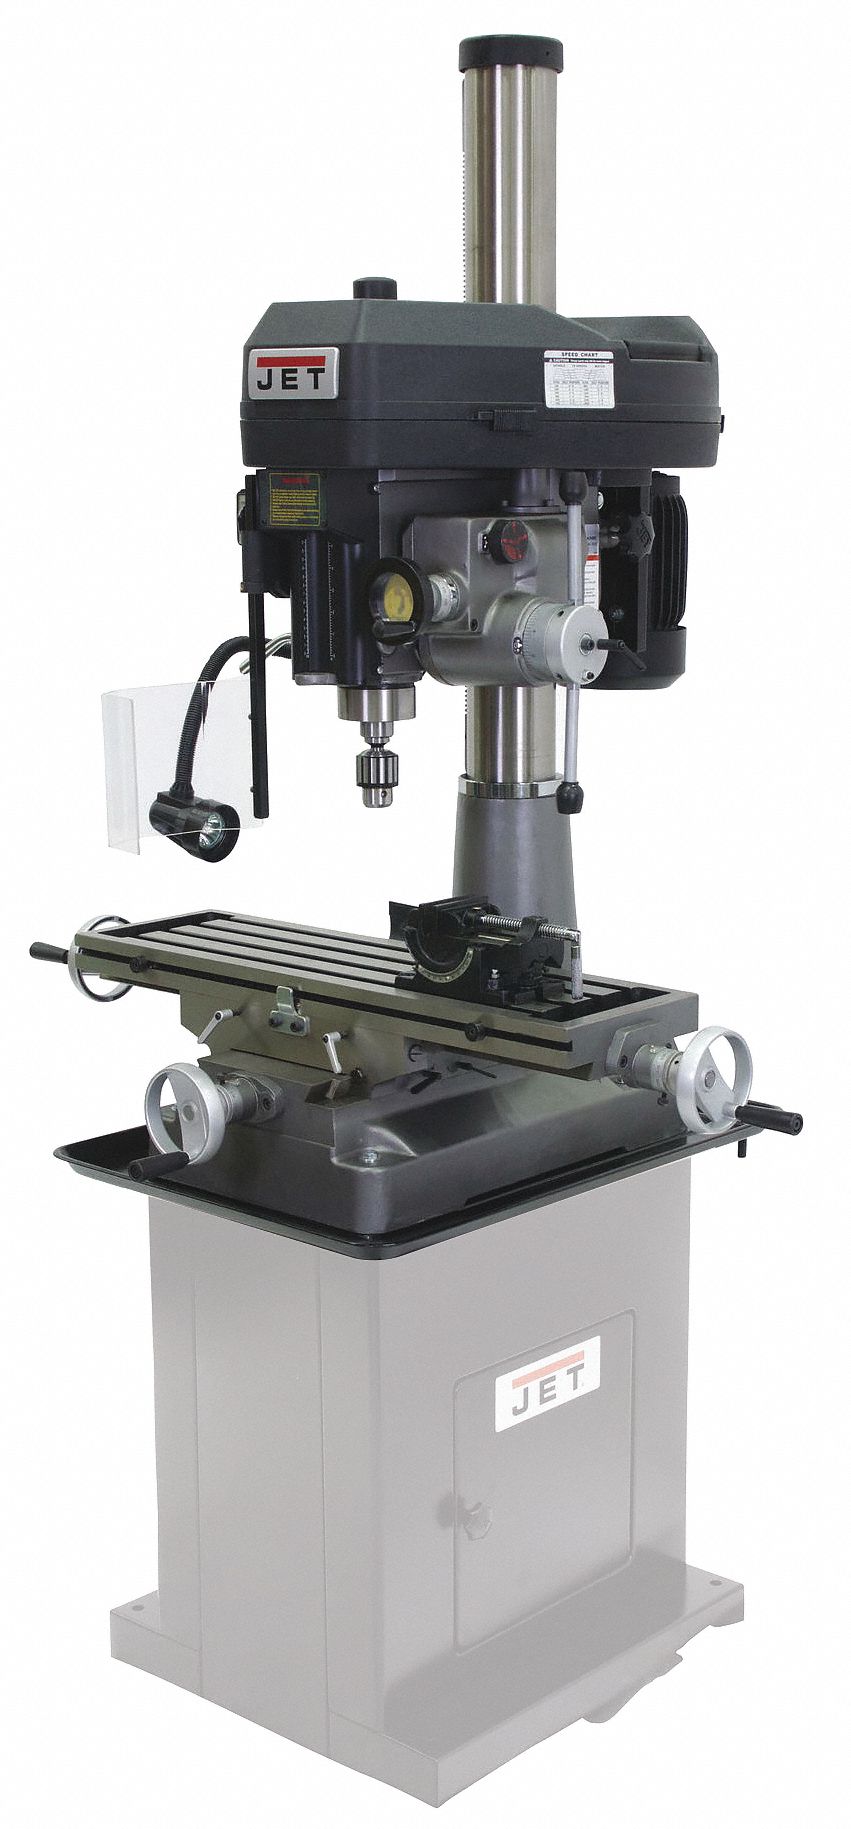 Mill Drill Machine: R8, 15 7/8 in Swing, 1 Phase, 120/240V, 1 1/4 in  Drilling Capacity Steel